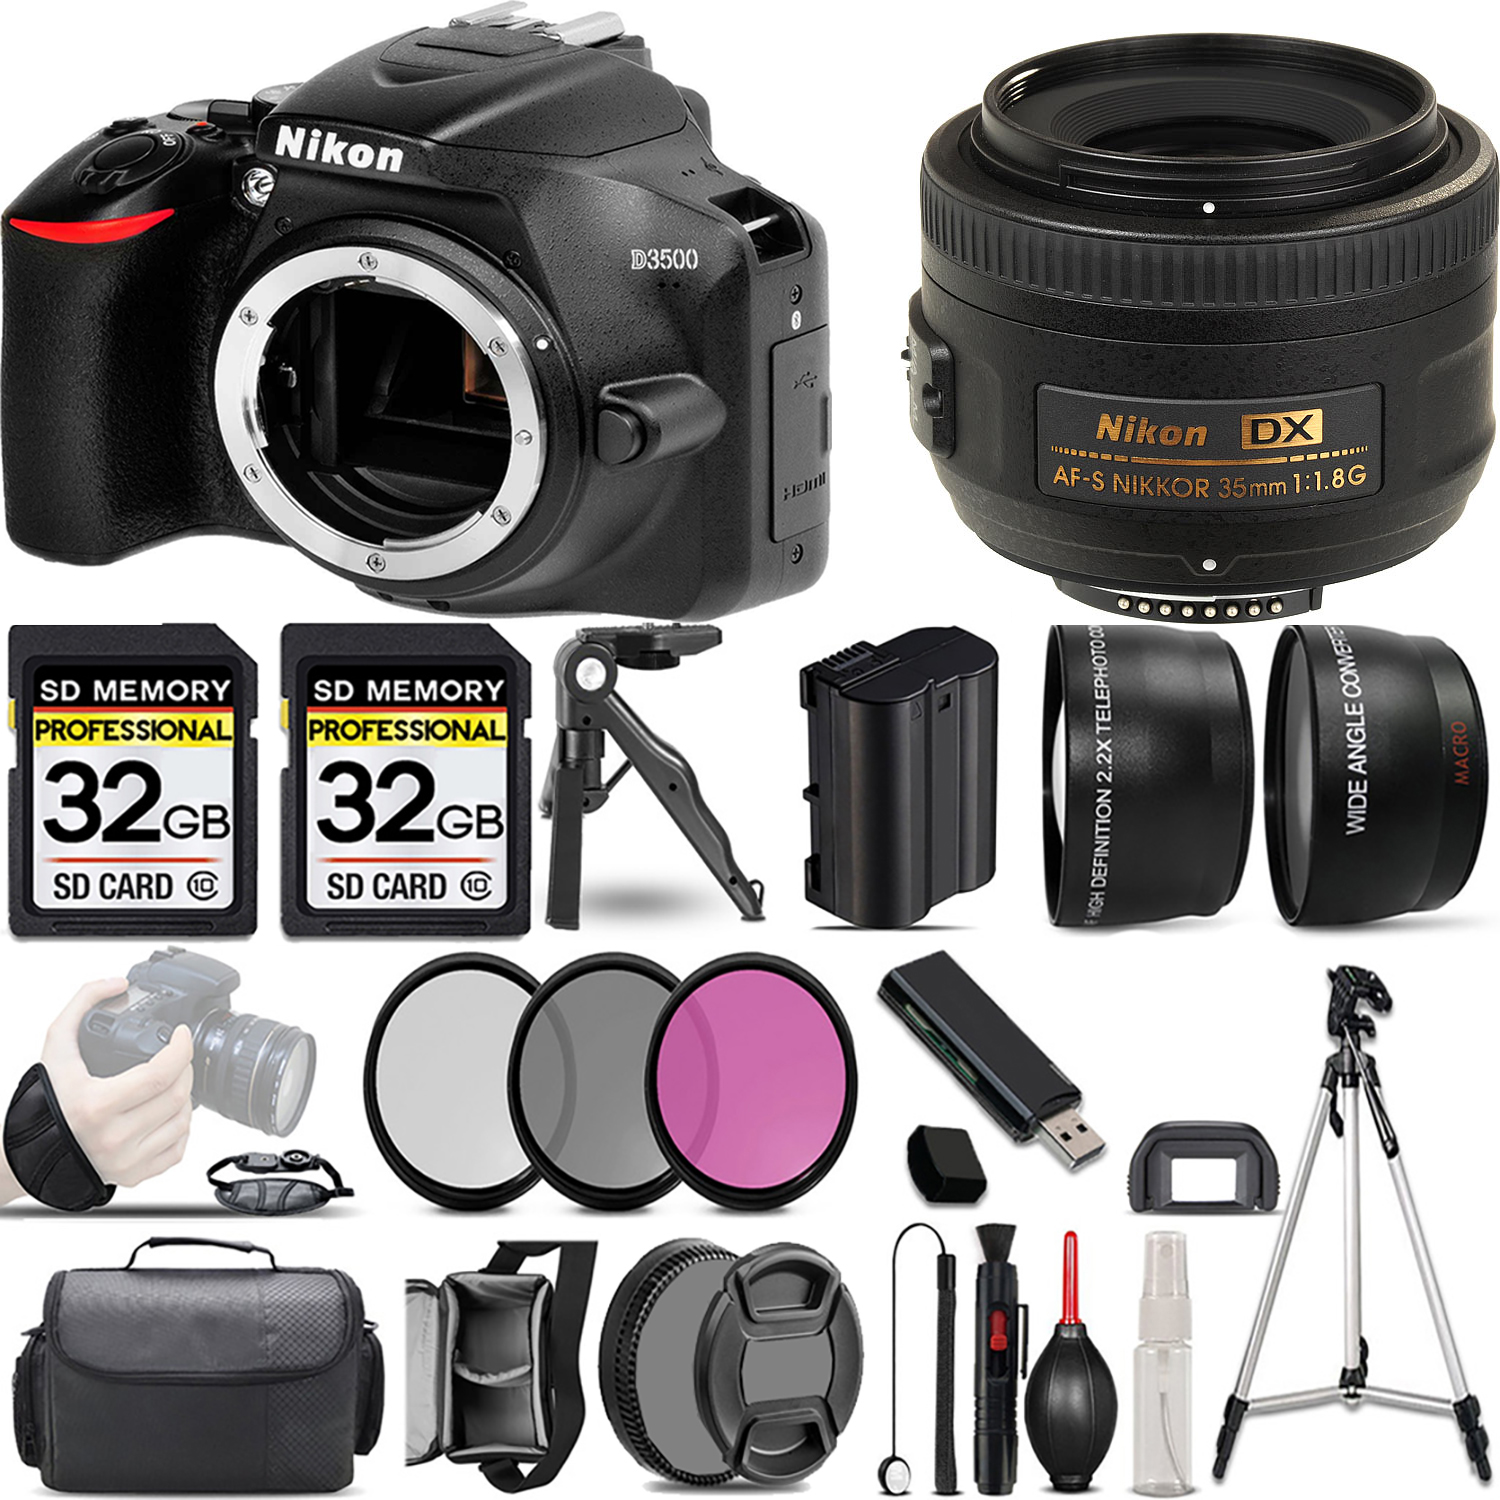 D3500 DSLR Camera (Body Only) + 35mm f/1.8 G Lens + 3 Piece Filter Set + 64GB *FREE SHIPPING*